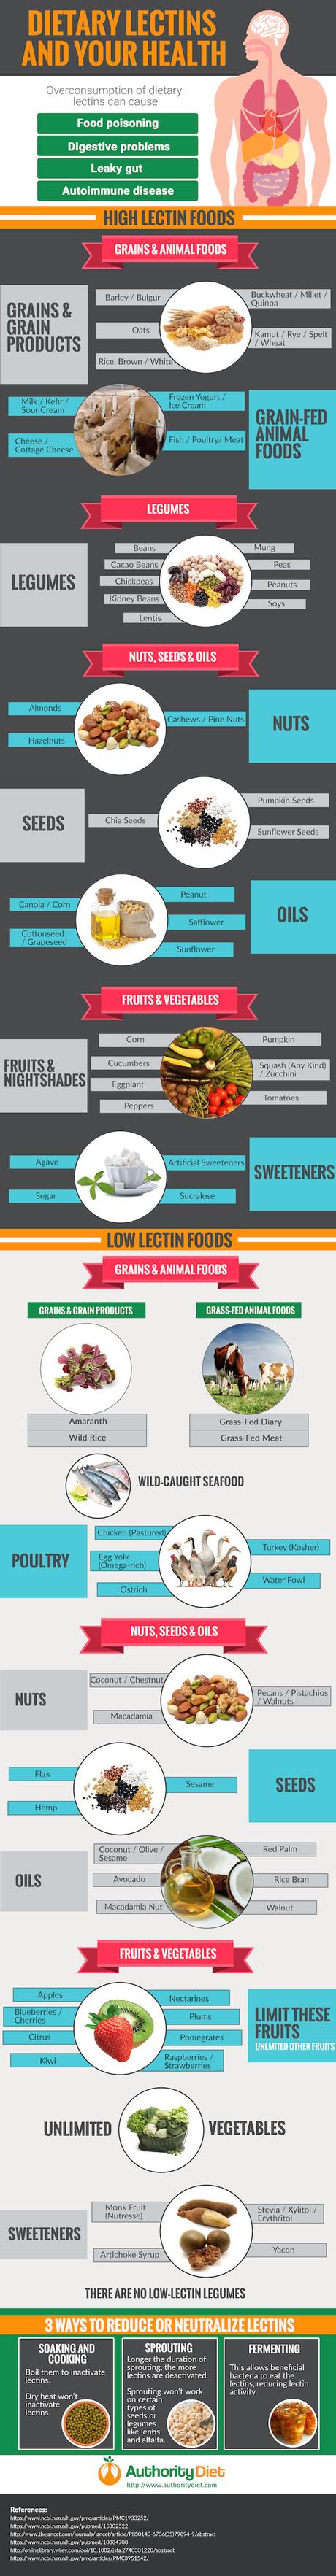 Dietary Lectin and Your Health infographic